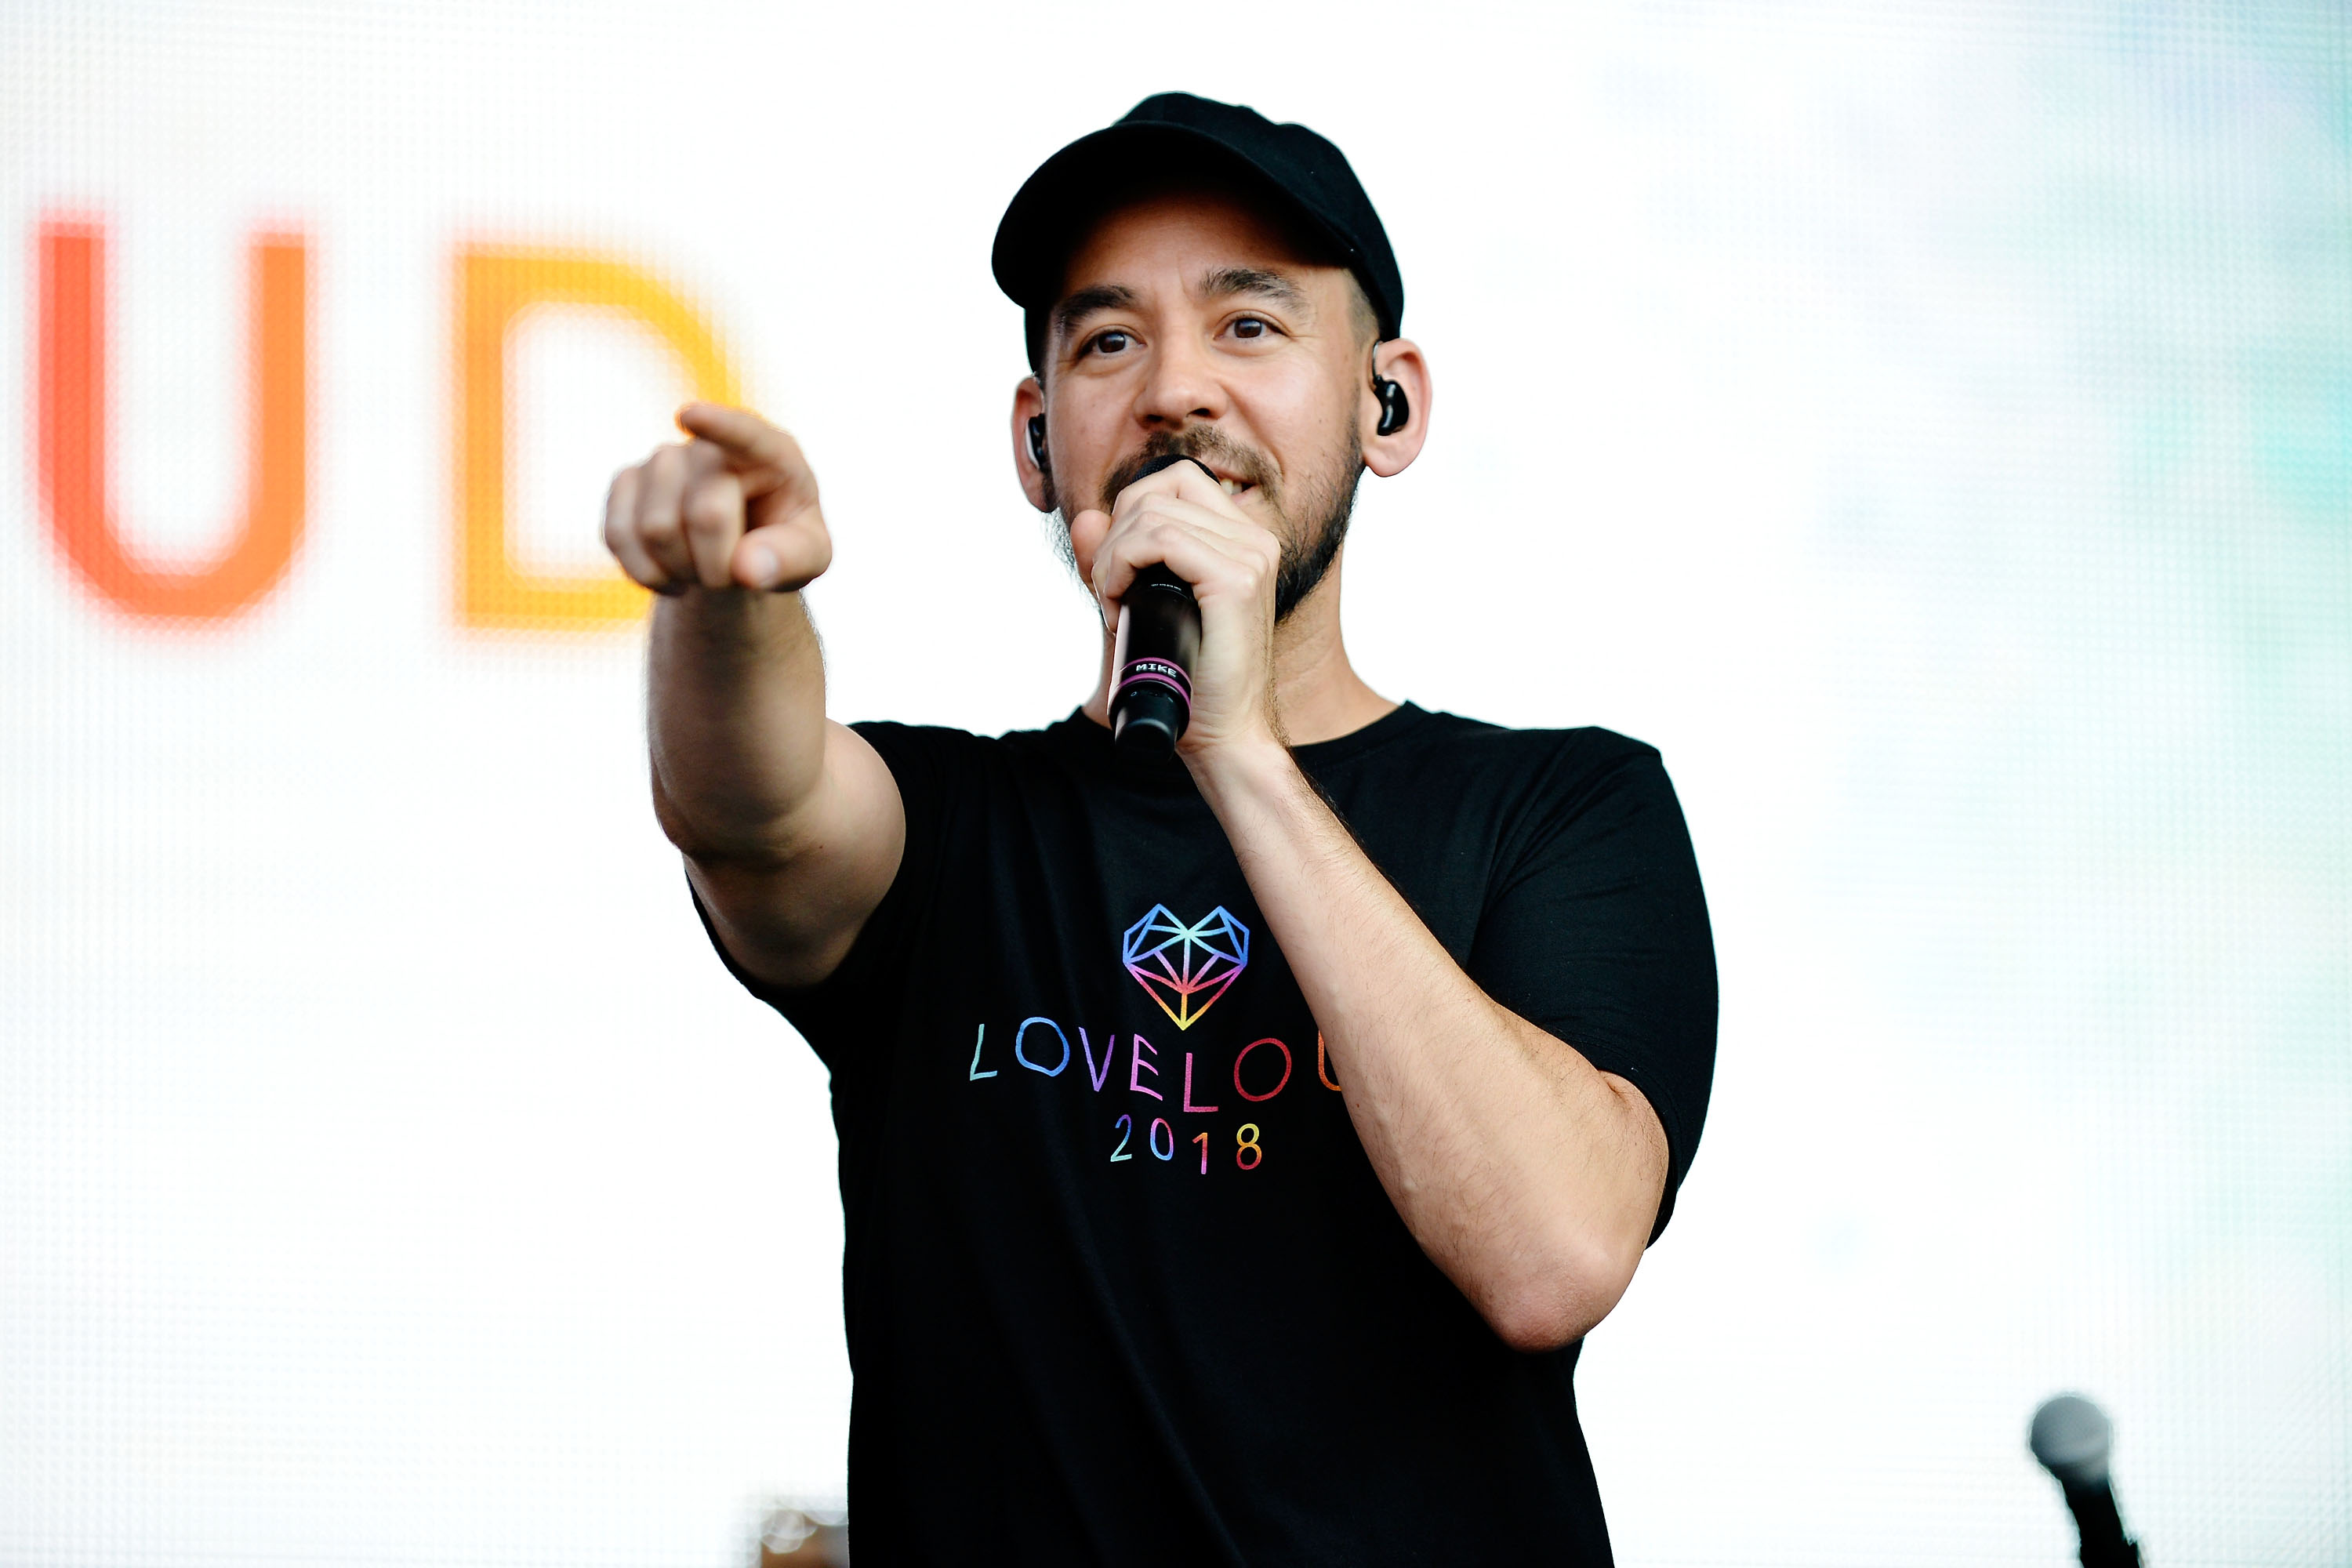 Mike Shinoda Says Linkin Park Has Unreleased Material With Chester Bennington